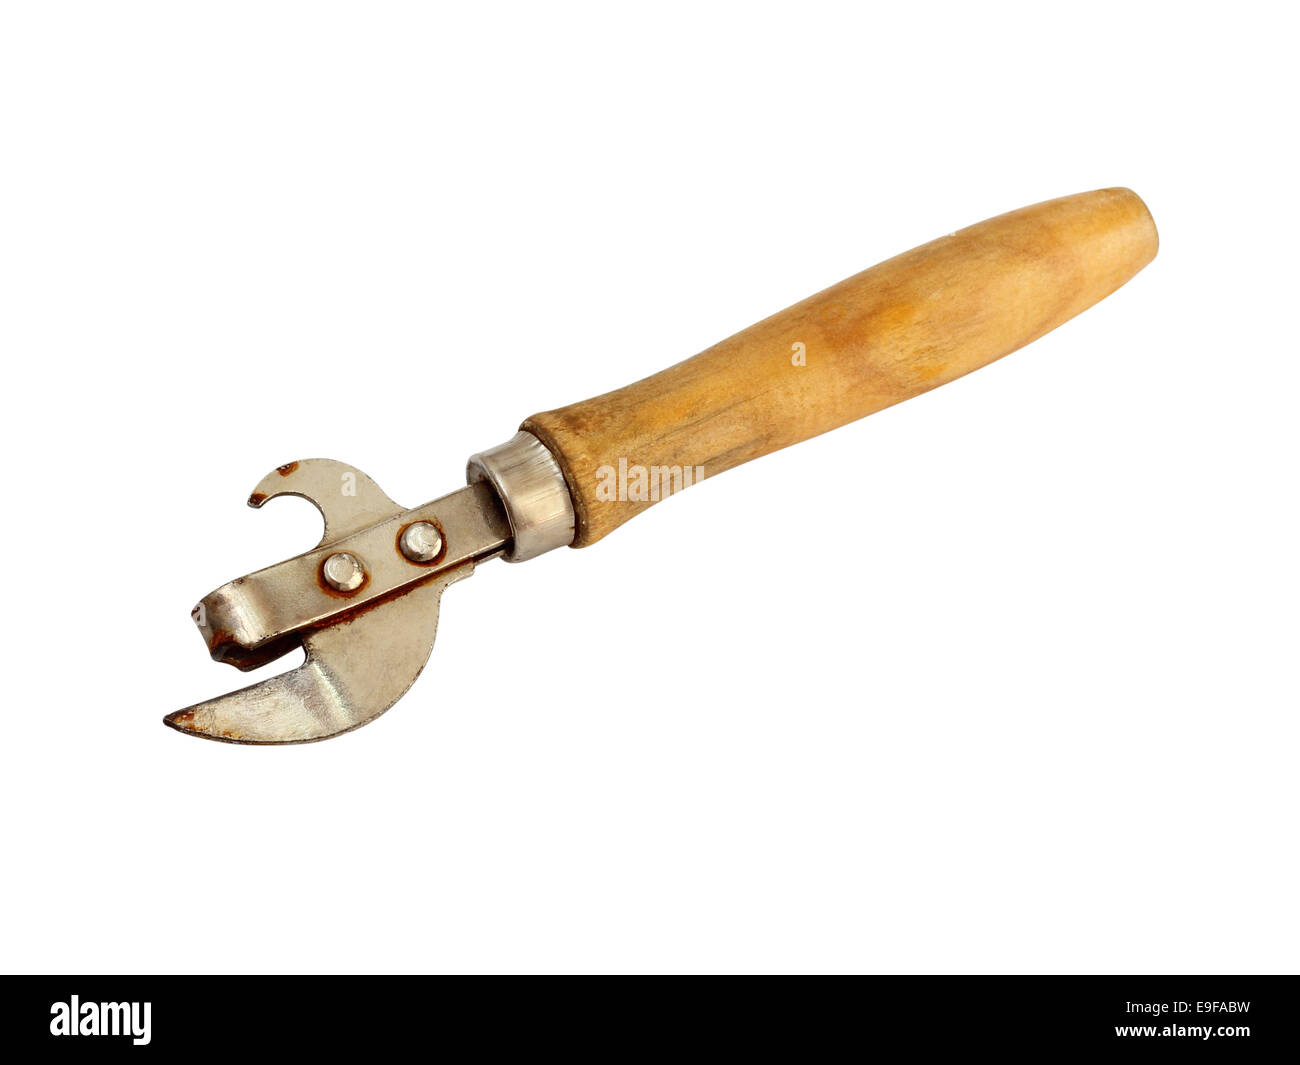 Vintage Can Opener On A White Background Stock Photo, Picture and Royalty  Free Image. Image 11250340.